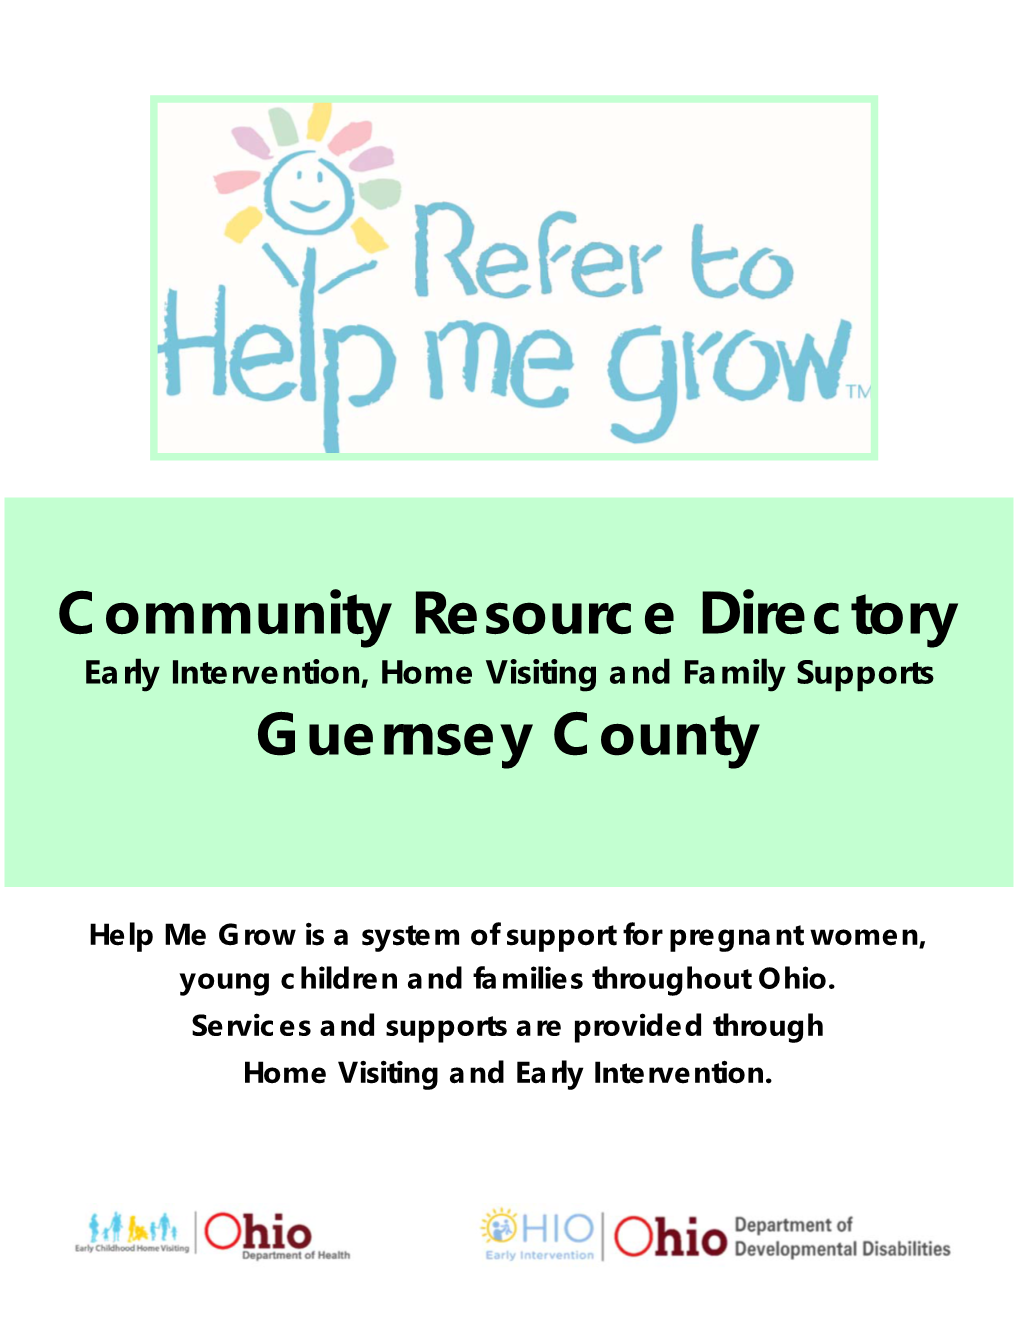 Community Resource Directory Guernsey County